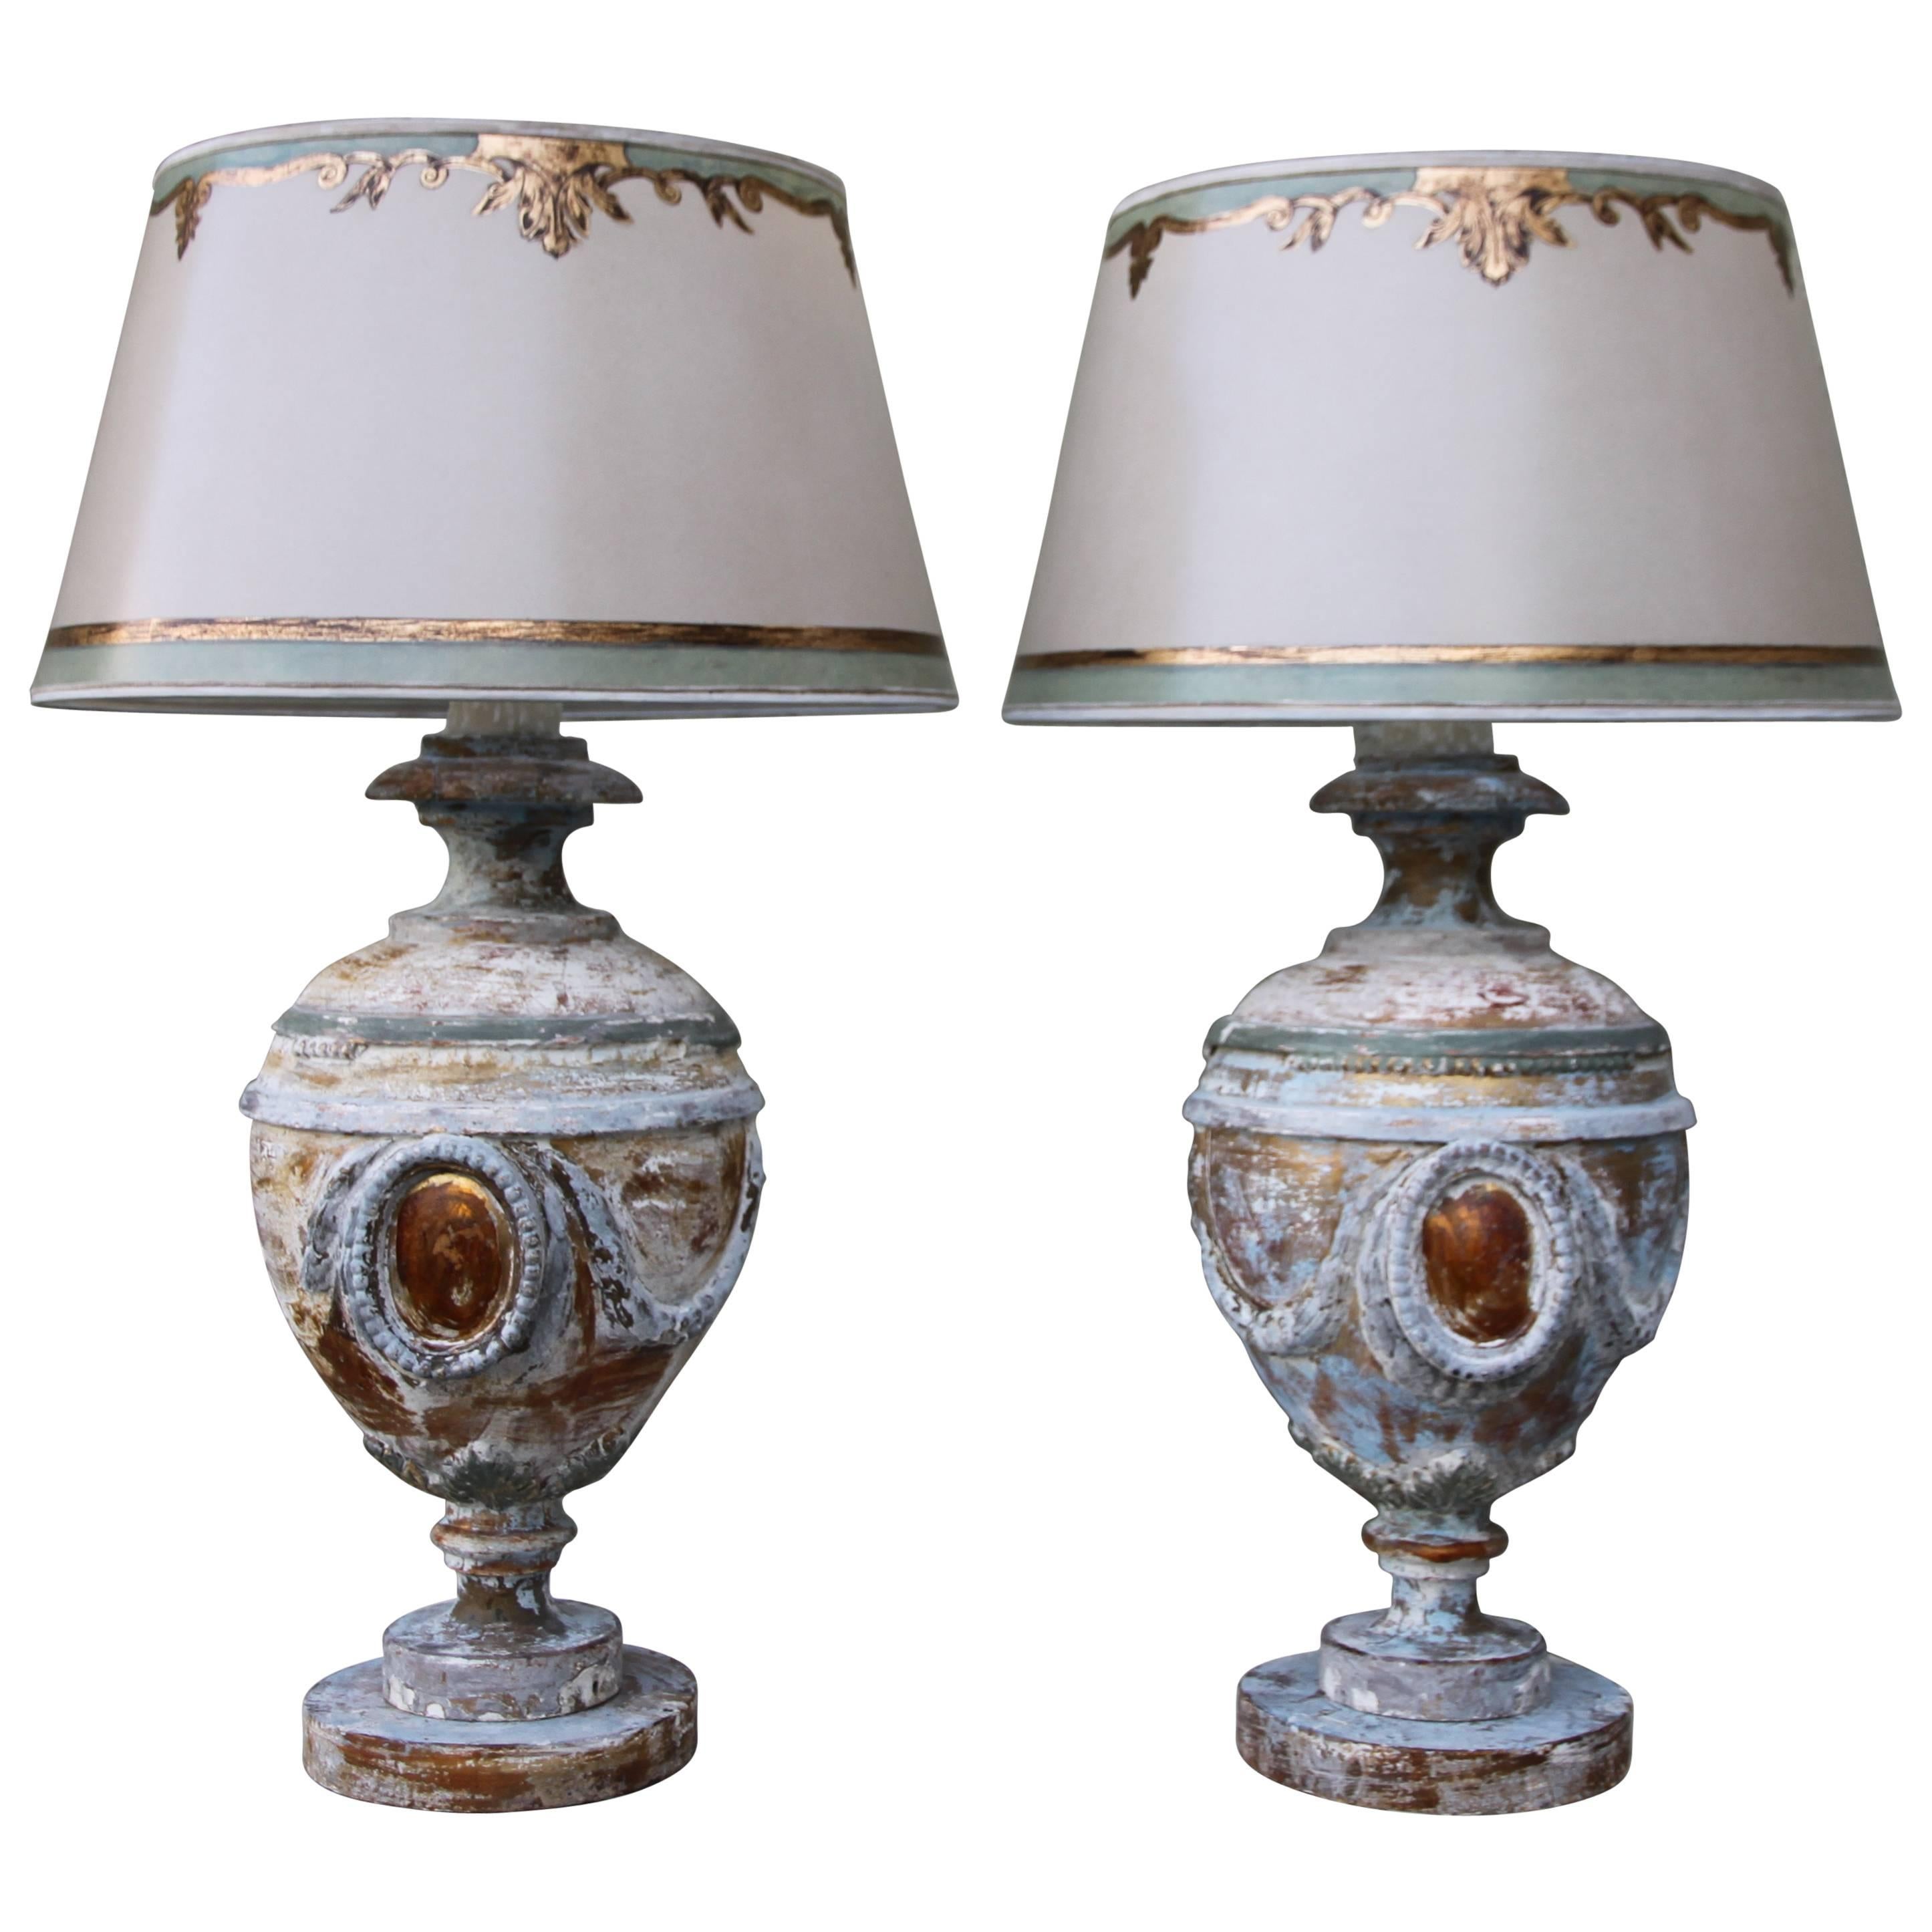 Pair of 19th Century Italian Urns Wired into Lamps and Crowned with Shades